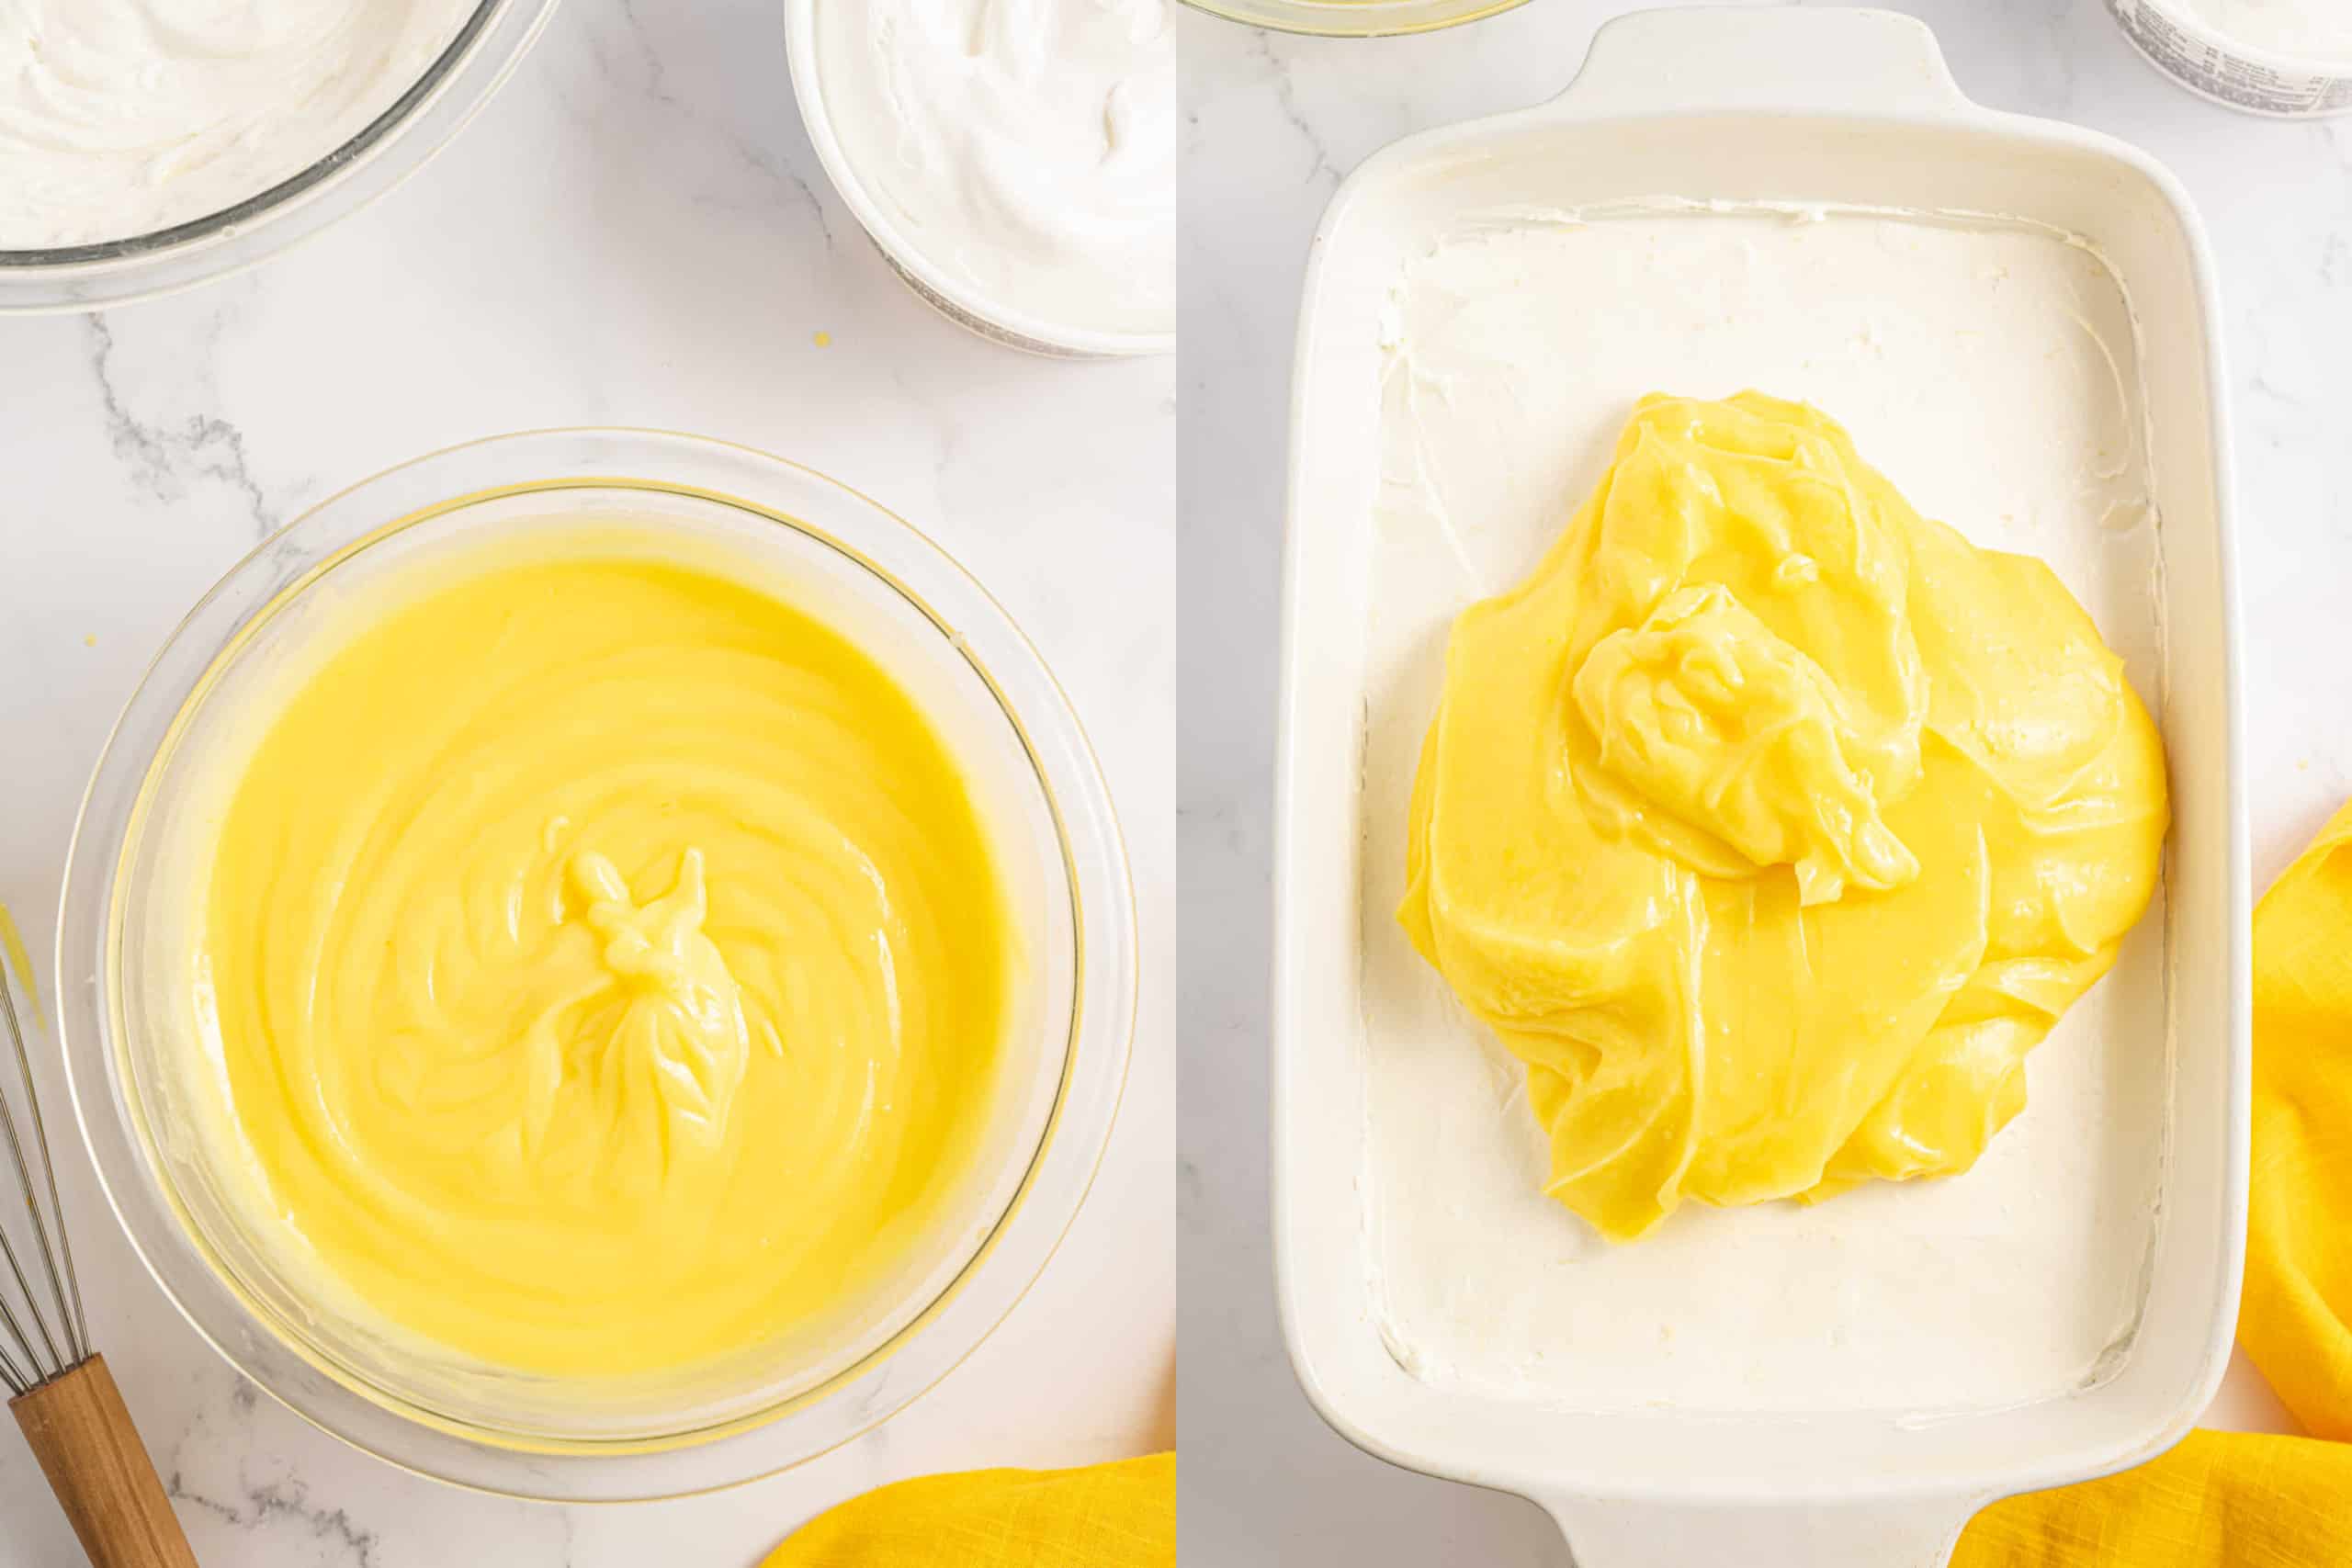 Step by step photos showing how to make lemon lush filling.